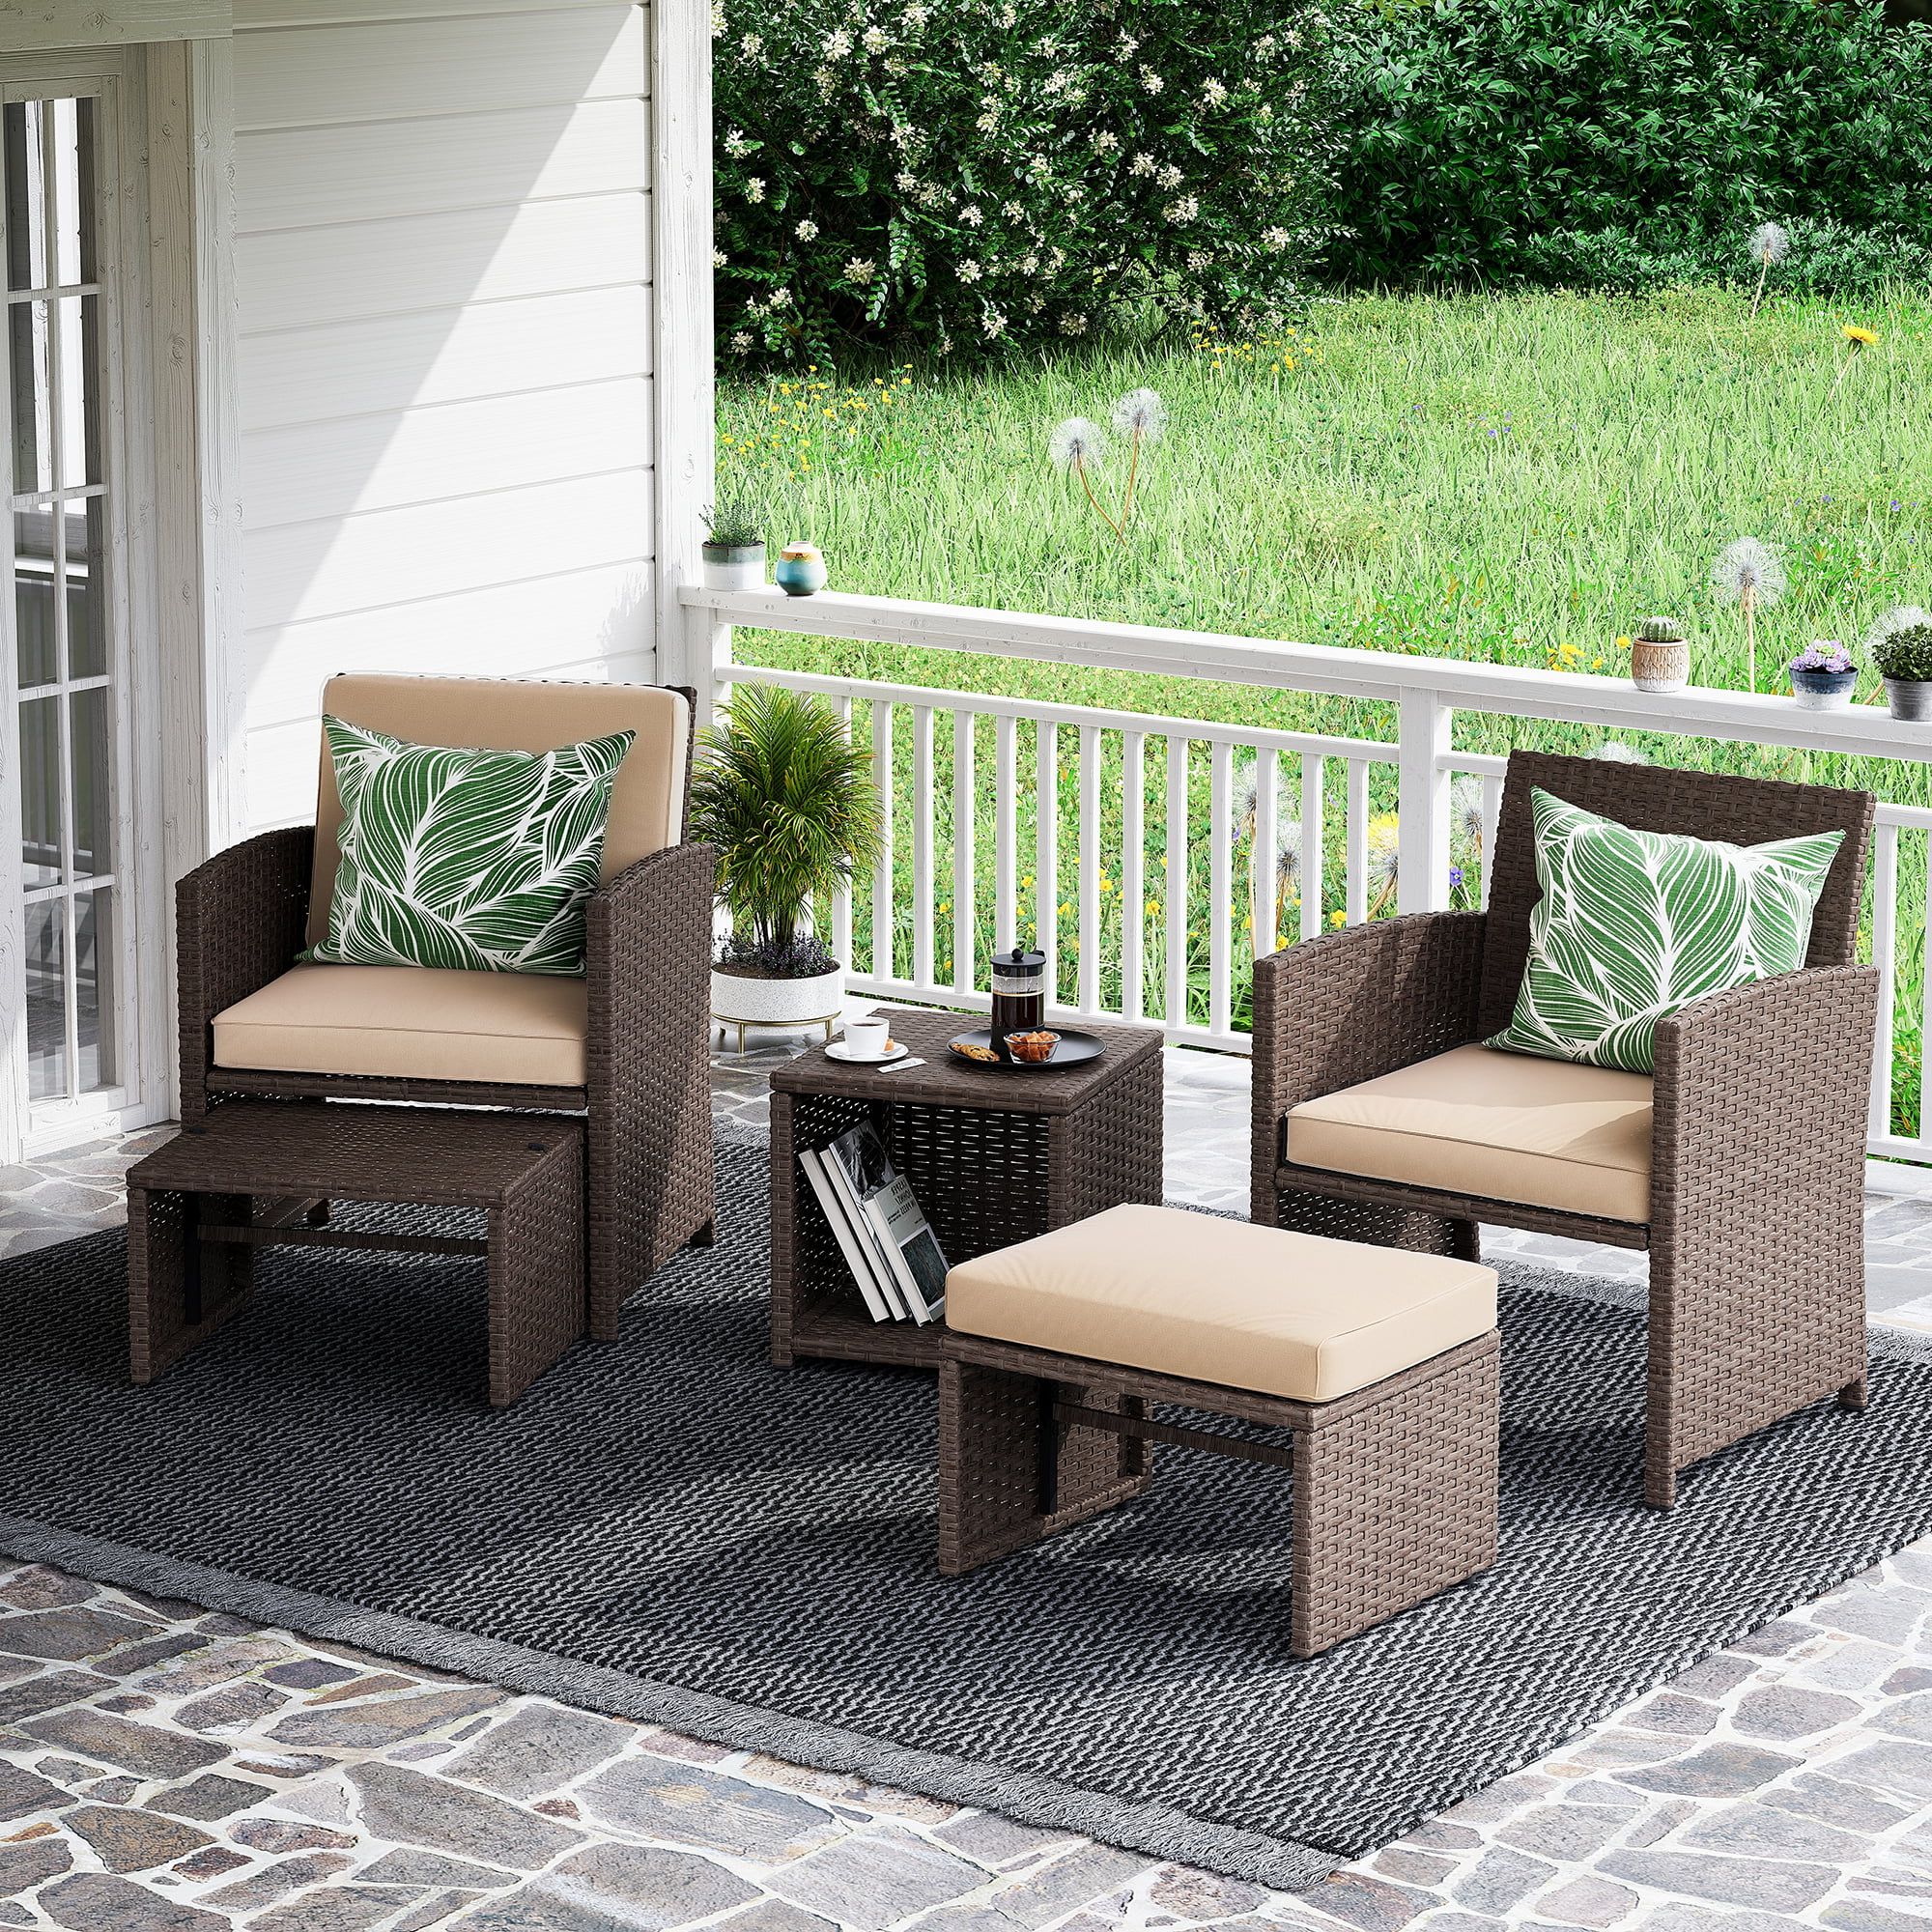 Current Orange Casual Patio Conversation Set Balcony Furniture Set With Beige  Cushions, Brown Wicker Chair With Ottoman, Steel, Wicker, Rattan –  Walmart In Balcony Furniture Set With Beige Cushions (Photo 2 of 15)